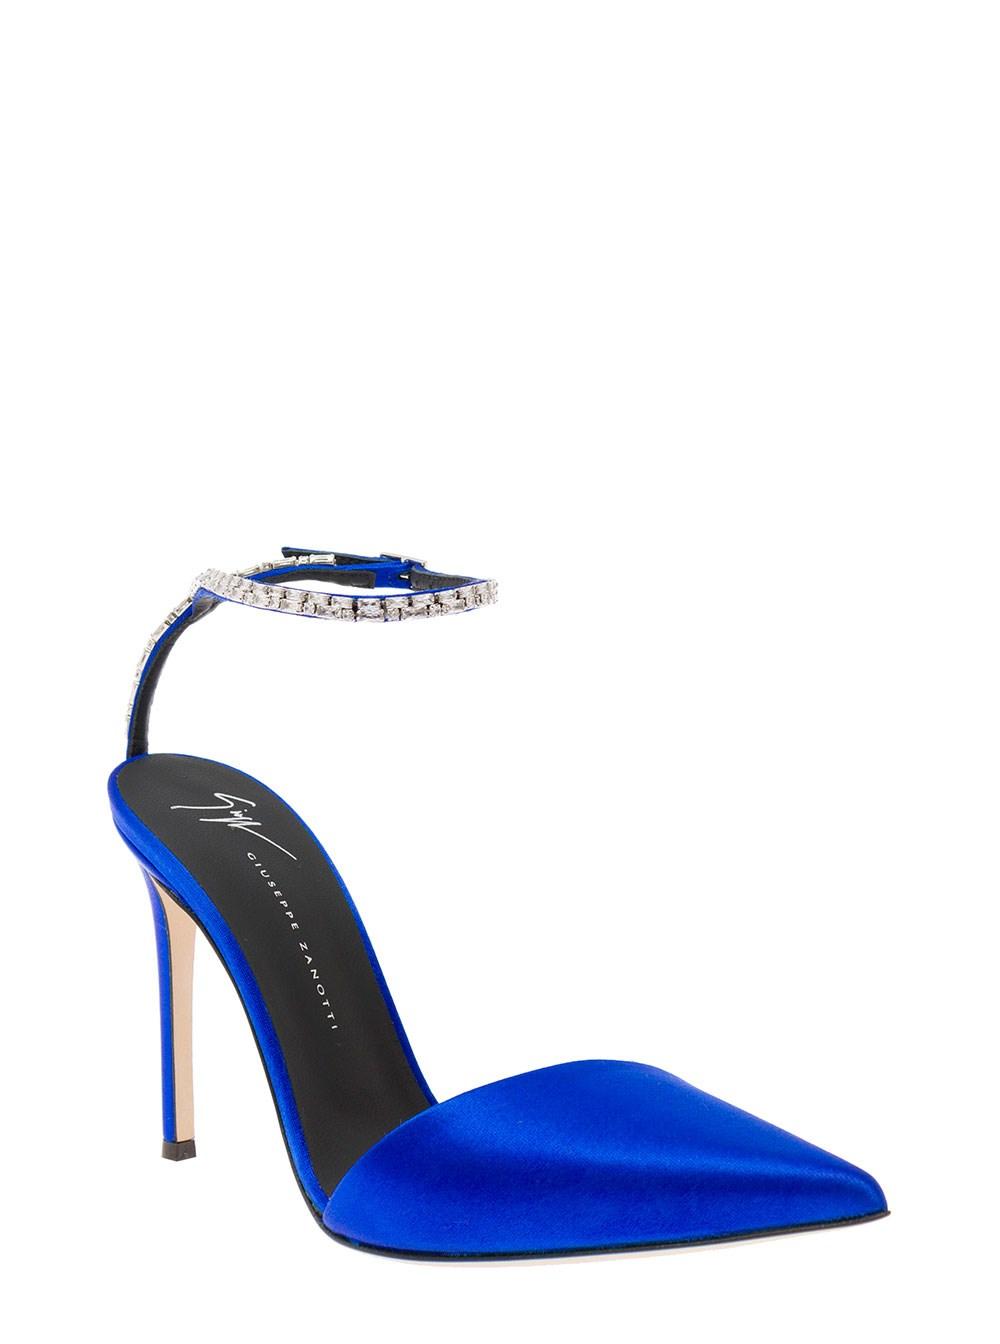 Giuseppe Zanotti Nates Blue Pumps In Satin Wih Crystals Embellished Ankle  Strap And 105 Mm Heel Woman | Lyst